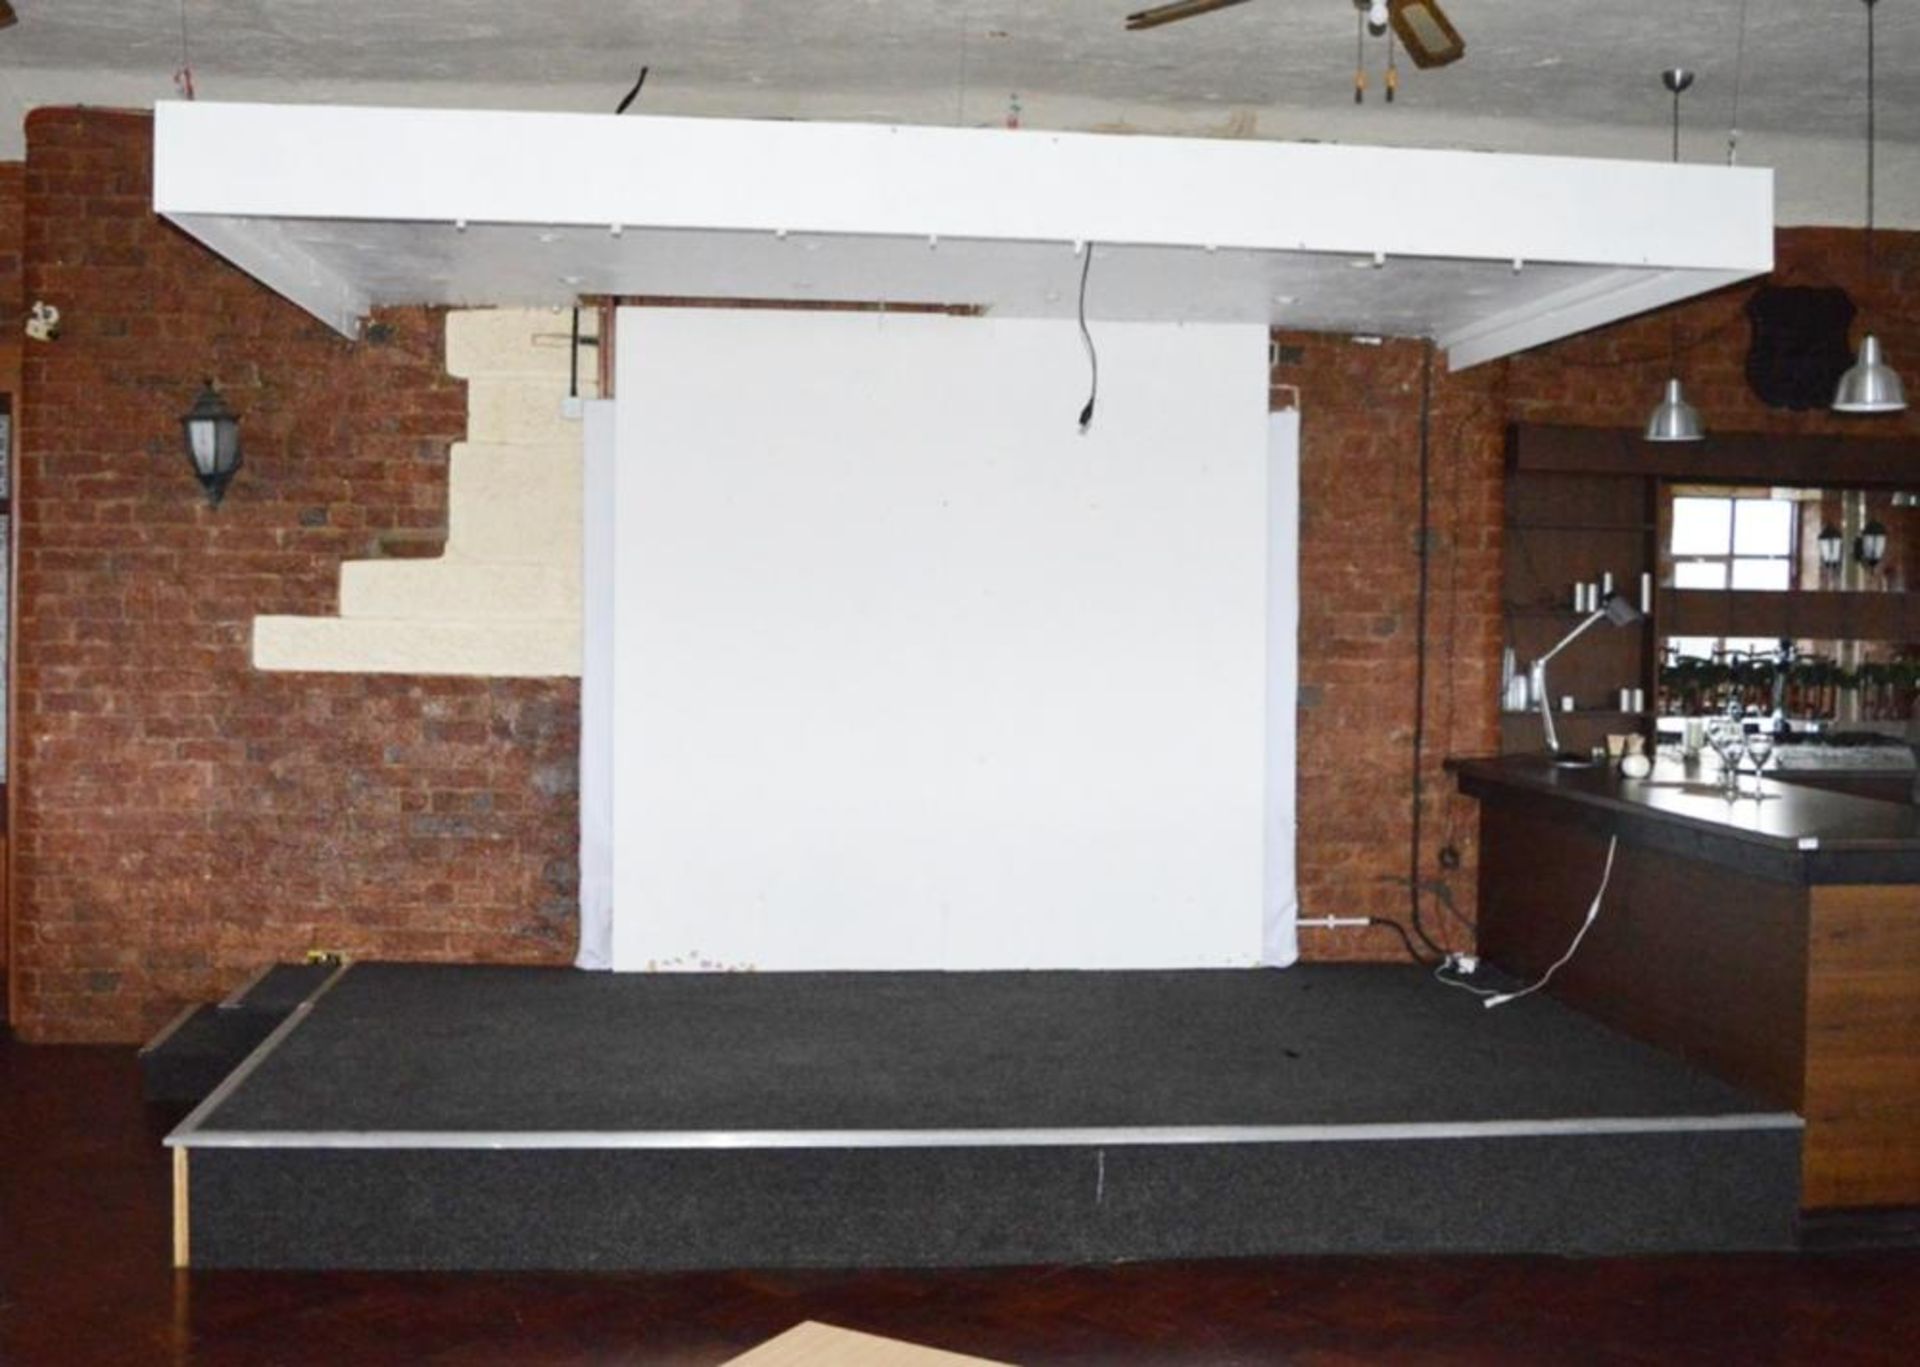 1 x Carpeted Stage Platform With Overhead Suspended Illuminated Cover and Access Steps - Platform Di - Image 2 of 9